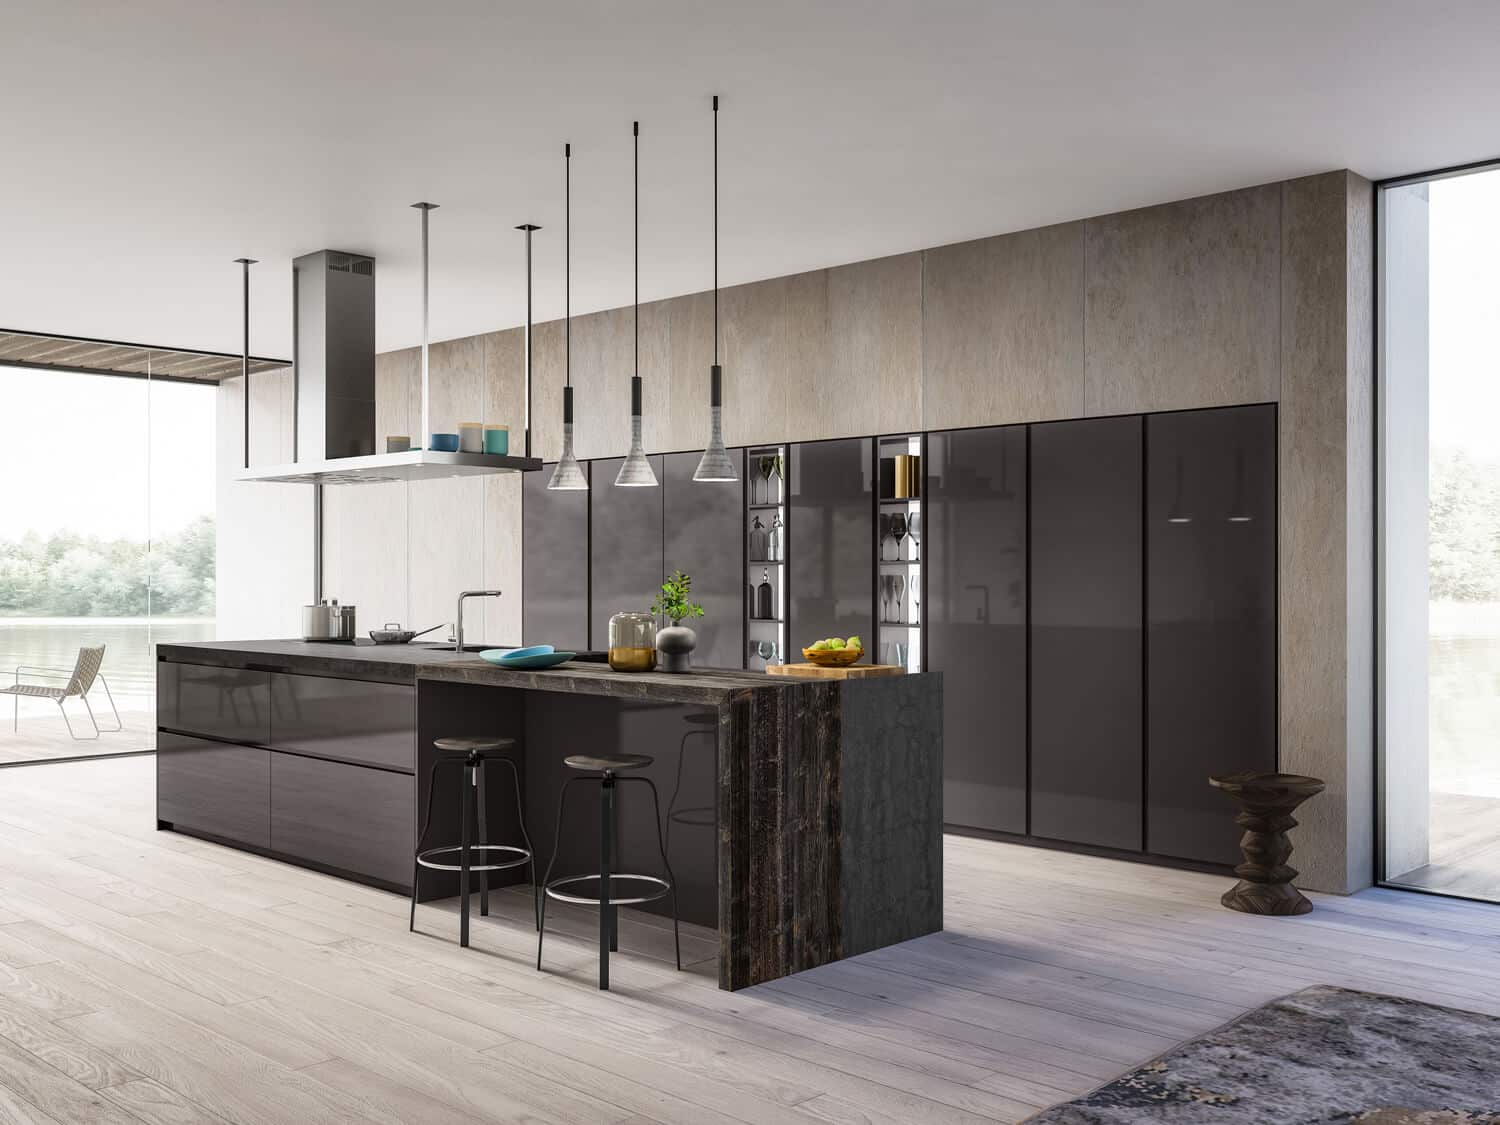 Luxury kitchen island and pantry in dark gray high gloss lacquer.